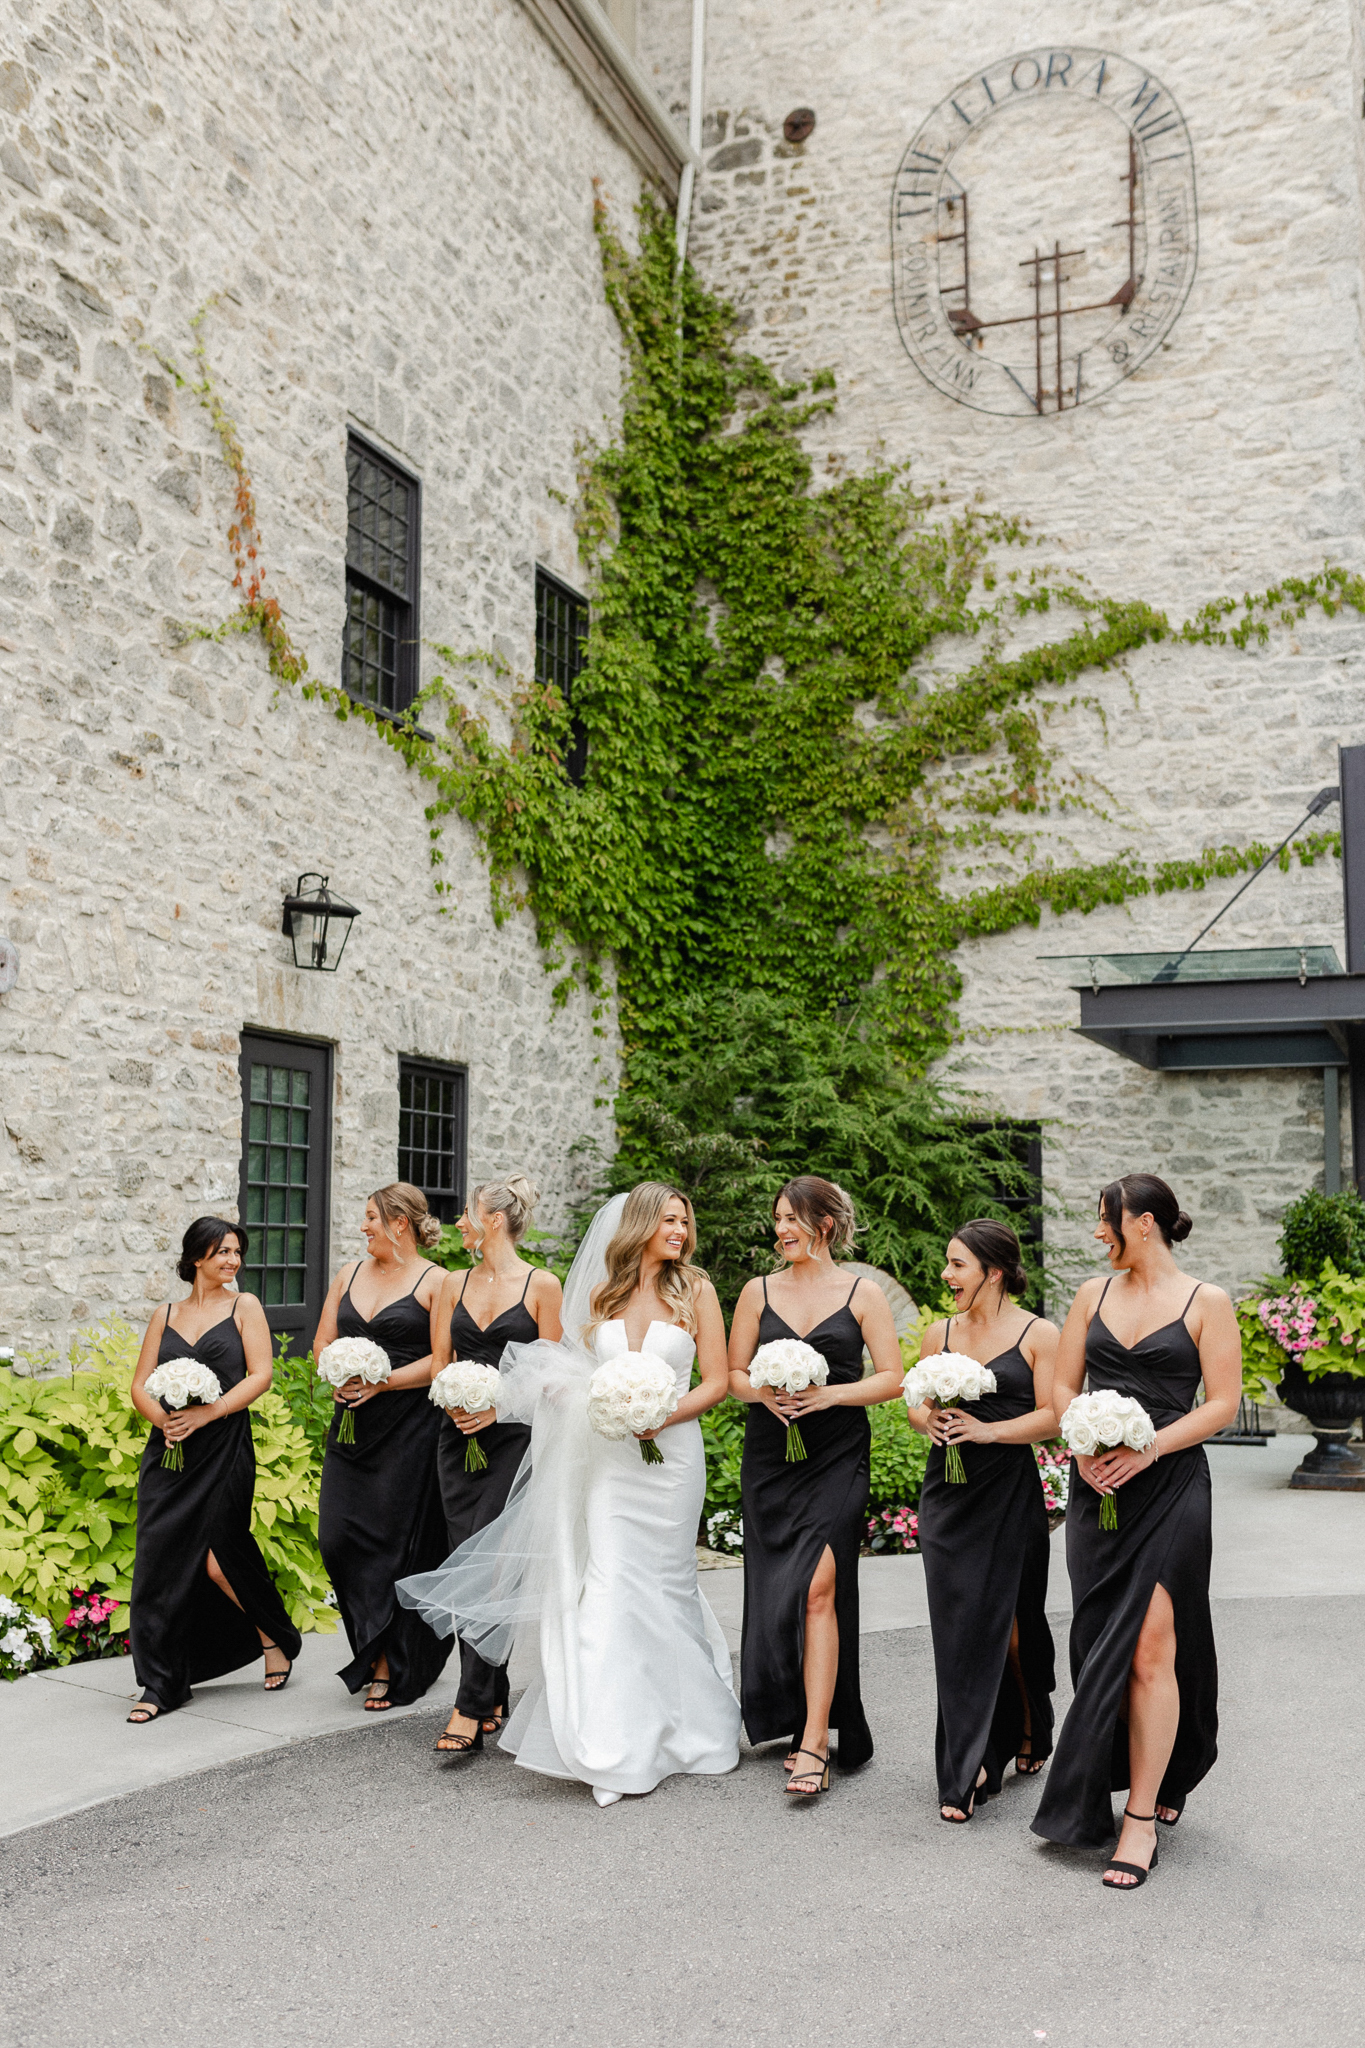 Bridesmaids elegantly dressed in black attire, holding beautiful white bouquets with the bride while walking and looking at each other